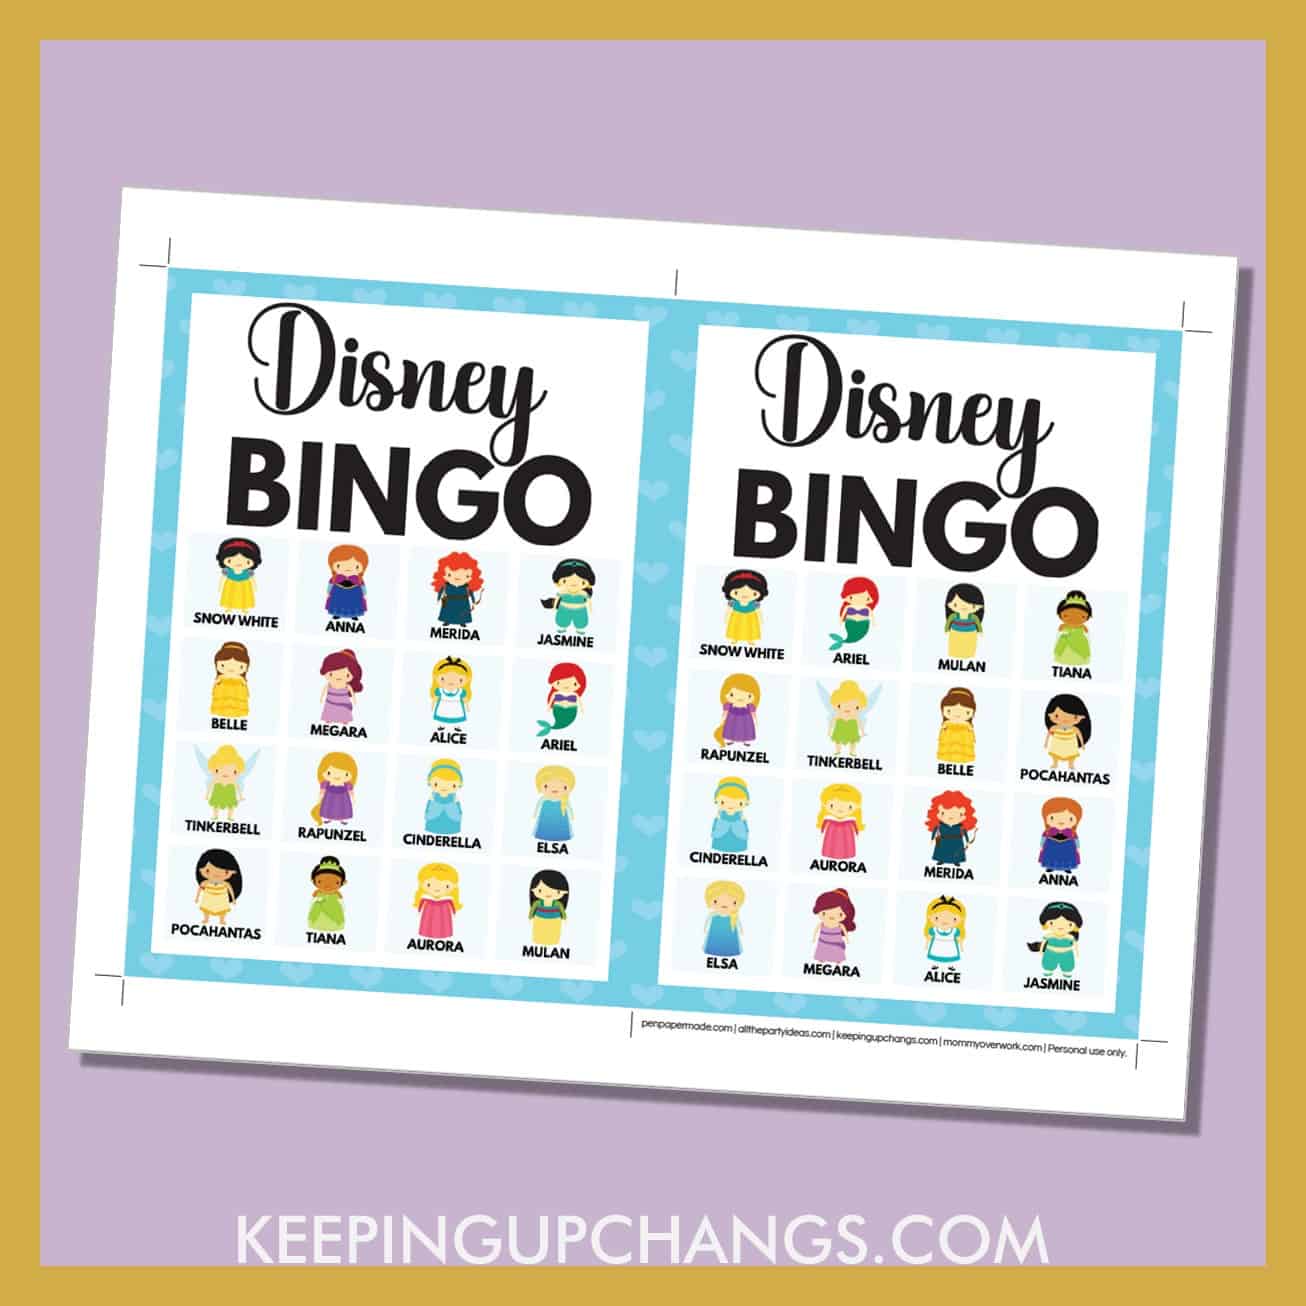 free disney princess bingo card 4x4 5x7 game boards with images and text words.